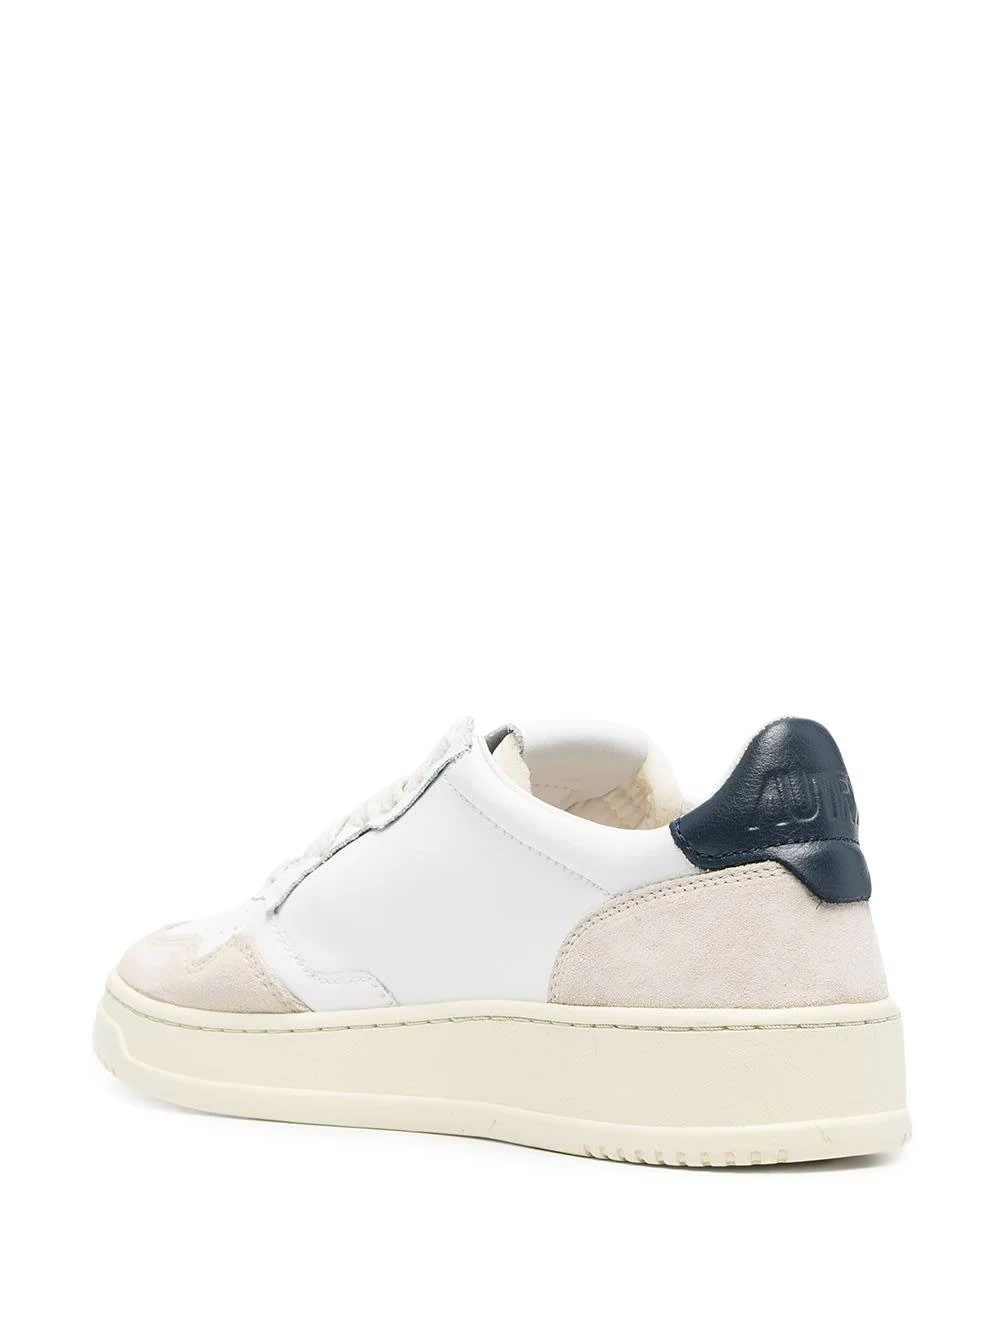 Shop Autry Medalist Low Sneakers In White And Navy Blue Suede And Leather